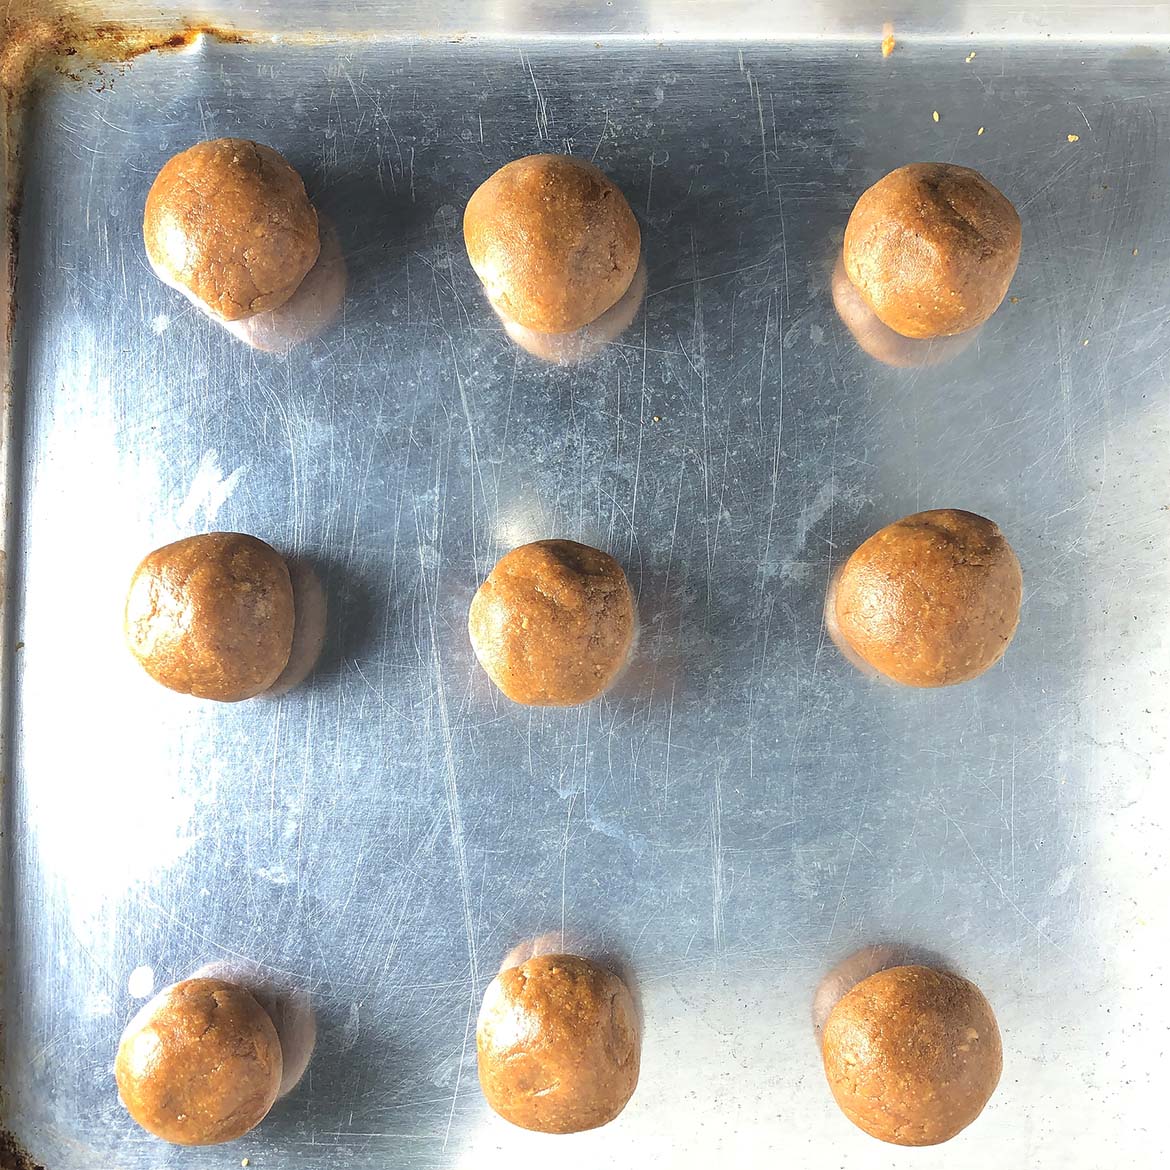 Top-down view of balls of Peanut Butter Cookie dough on baking sheet.